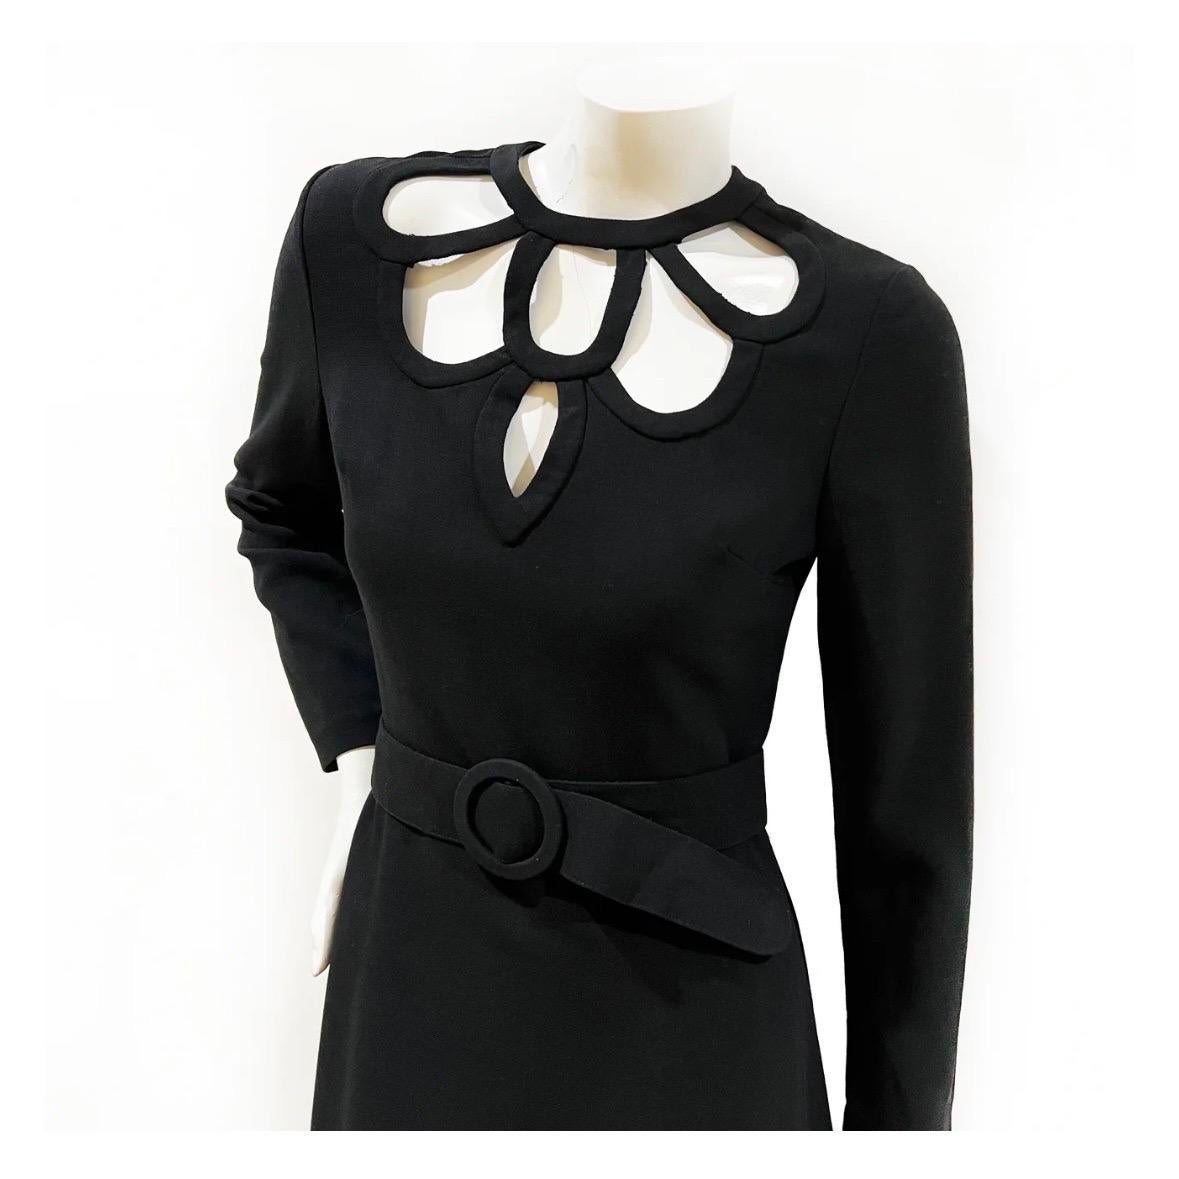 Decorative cutout neckline dress by Louis Feraud 
Made in Germany 
1974
Black 
Full-length 
Long sleeves with functional cuff zippers
Scalloped keyhole cutouts along neckline 
Includes matching belt    
Back zipper closure  
Wool blended crepe w/